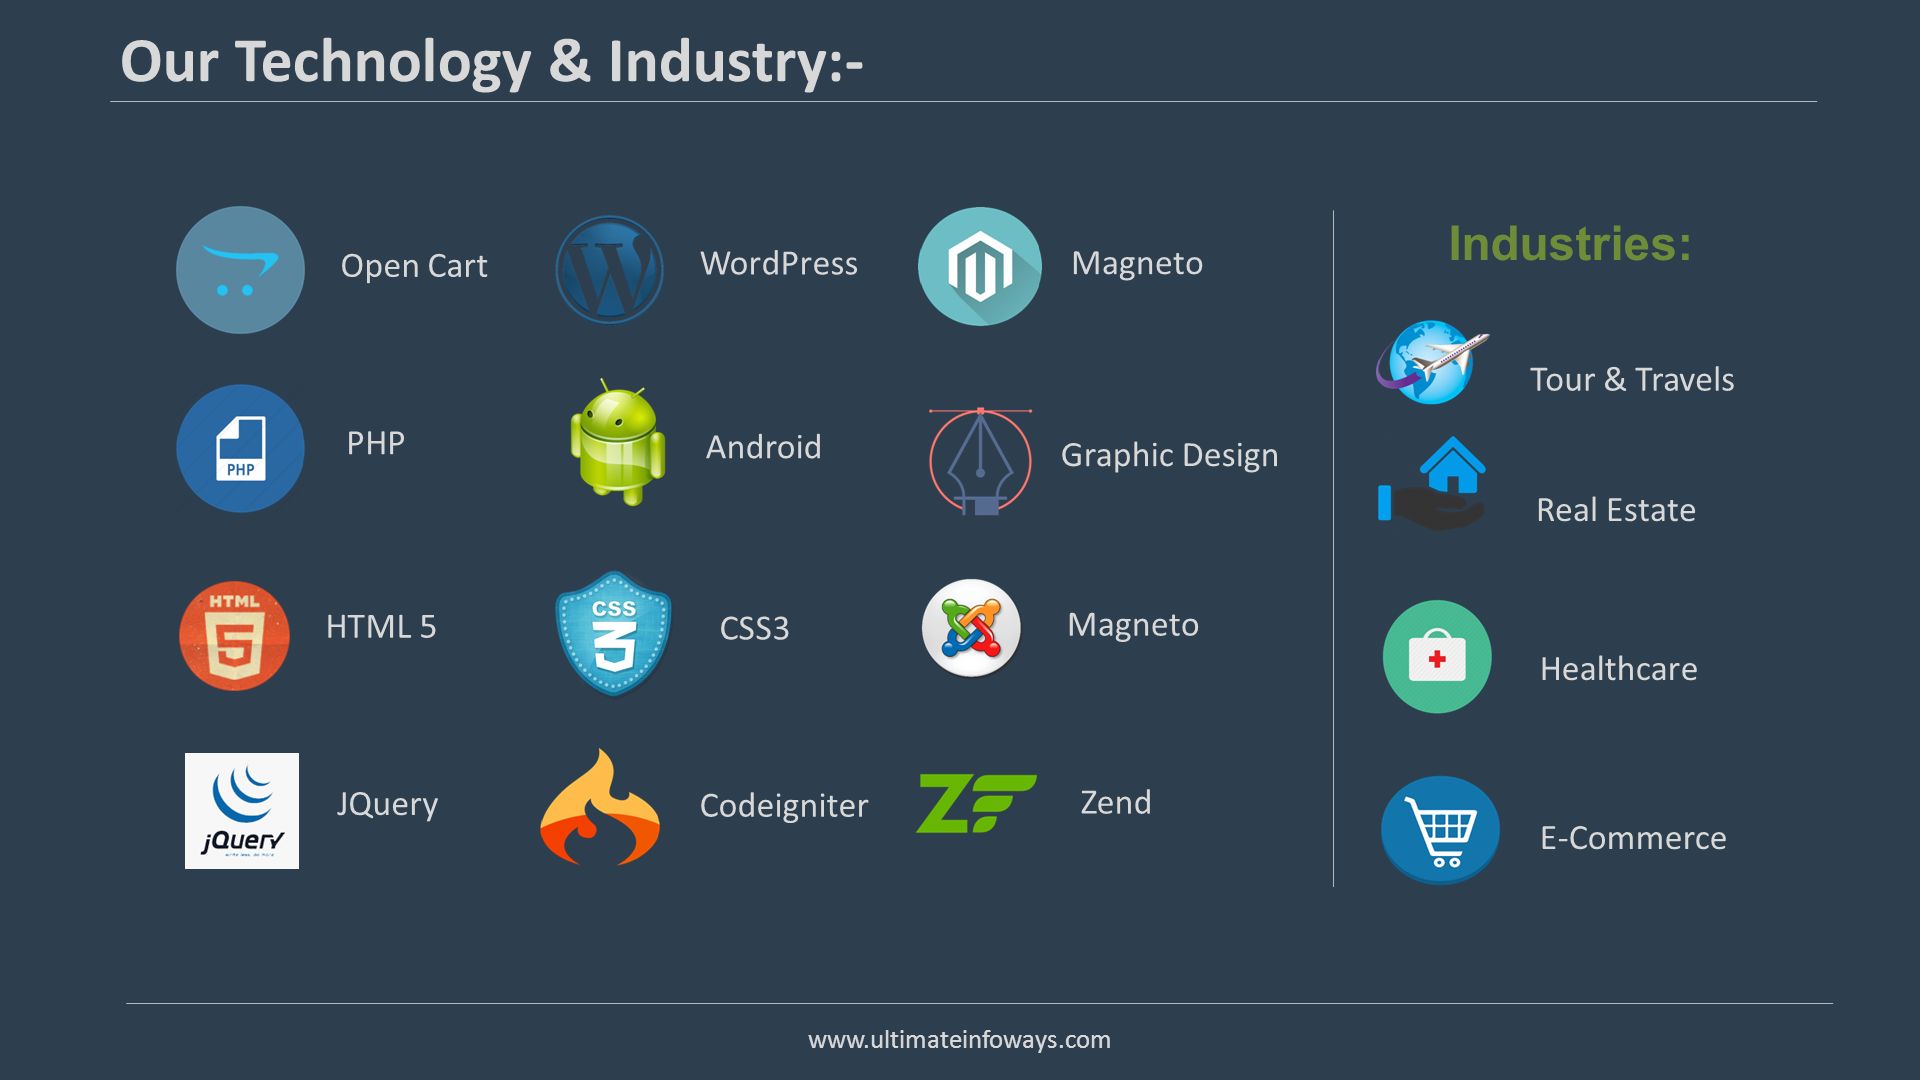 10 Solutions   Our Technology & Industry:- Open Cart WordPress Magneto PHP Android Graphic Design HTML 5 CSS3 Magneto JQuery Codeigniter Zend Tour & Travels Industries: Real Estate Healthcare E-Commerce